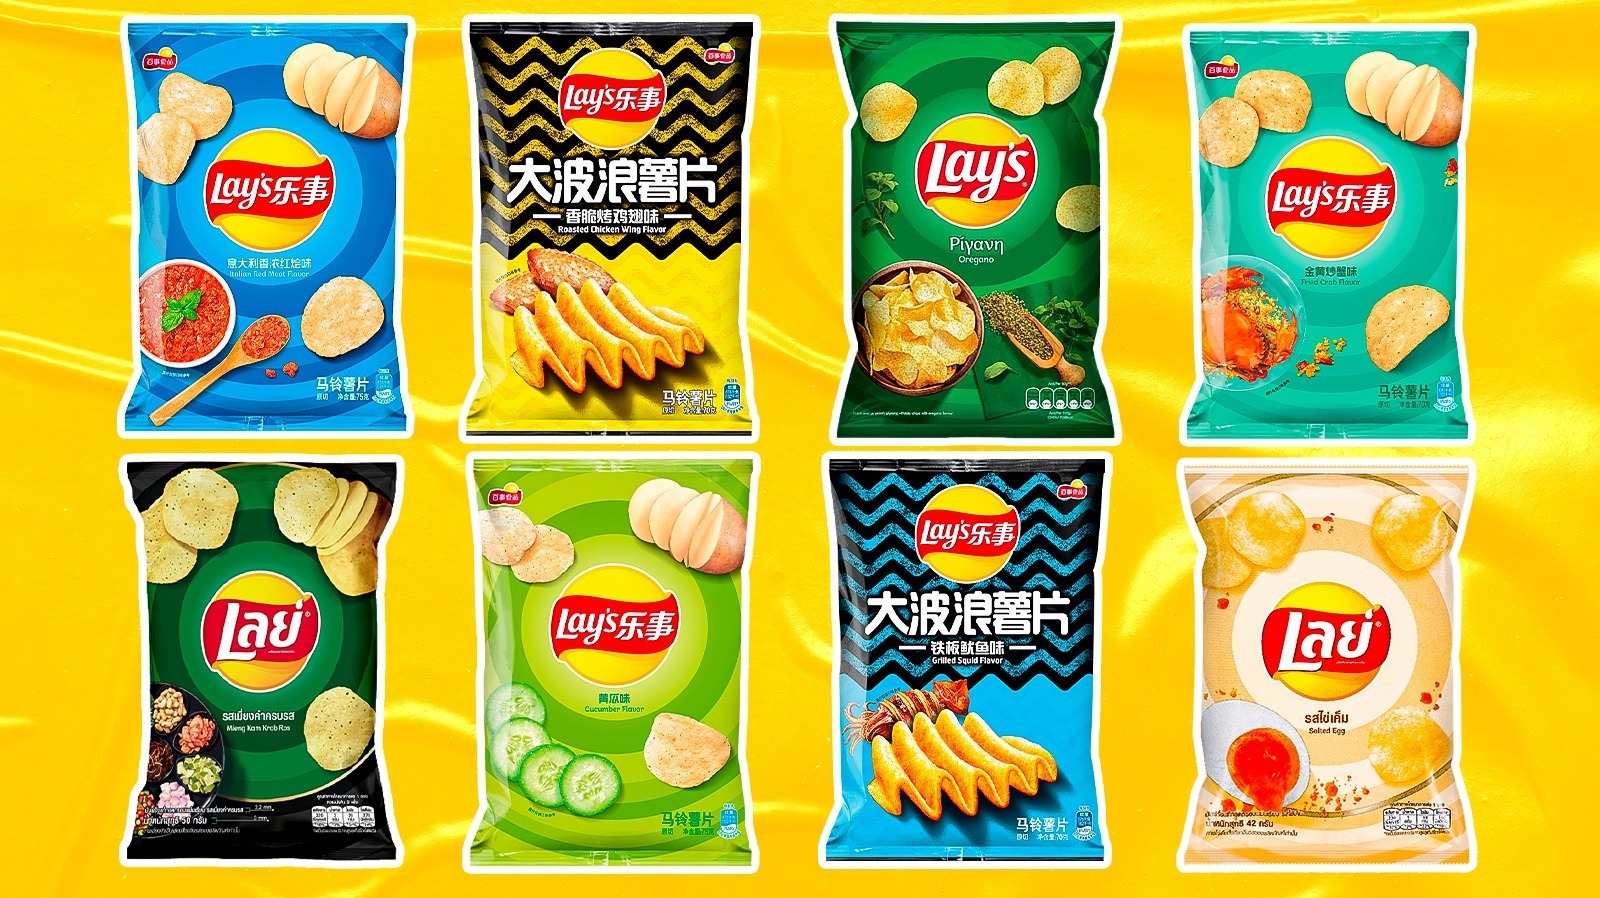 Exotic Rare International Lays Chips Variety Unique Limited